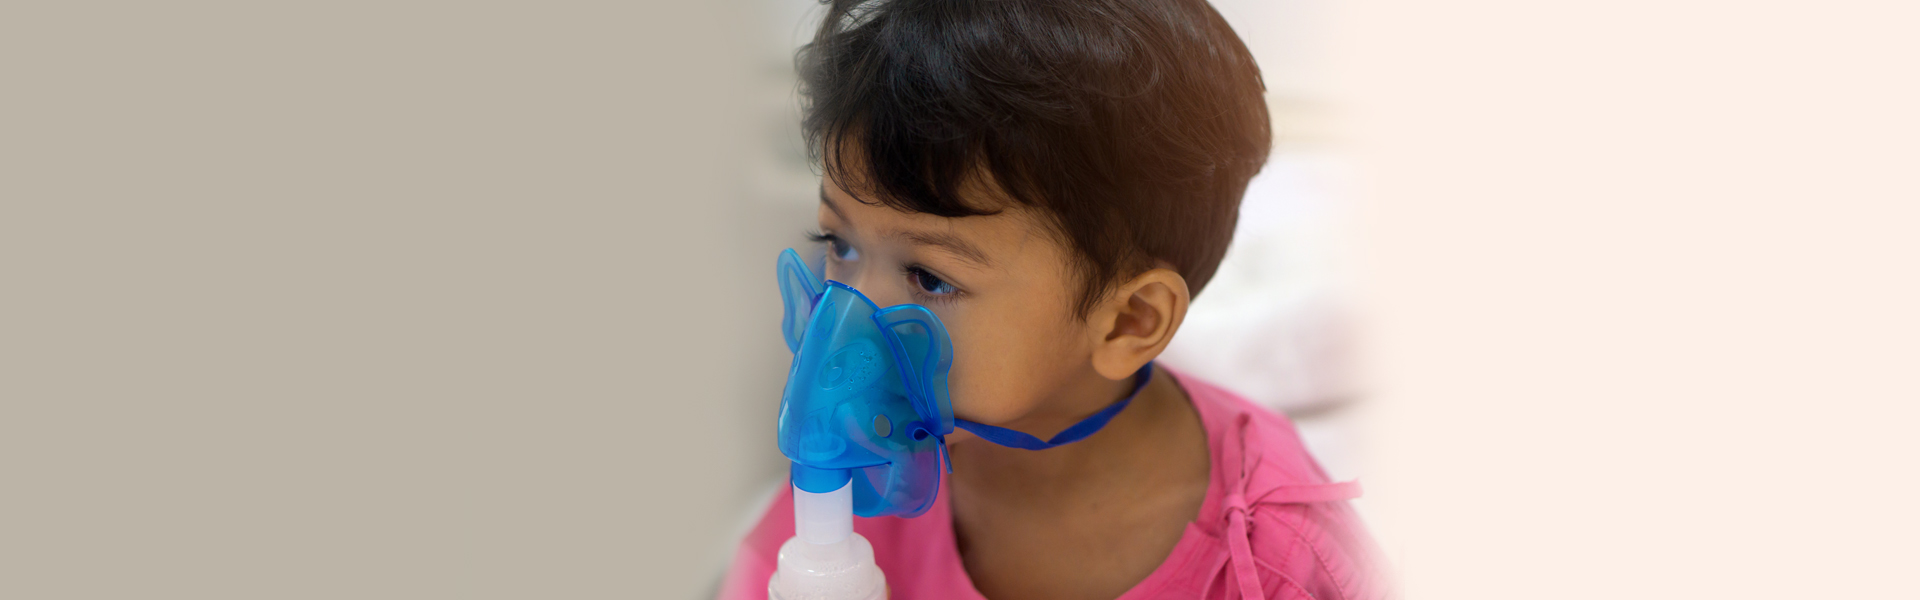 RSV and Pneumonia - Know When to Go to the ER